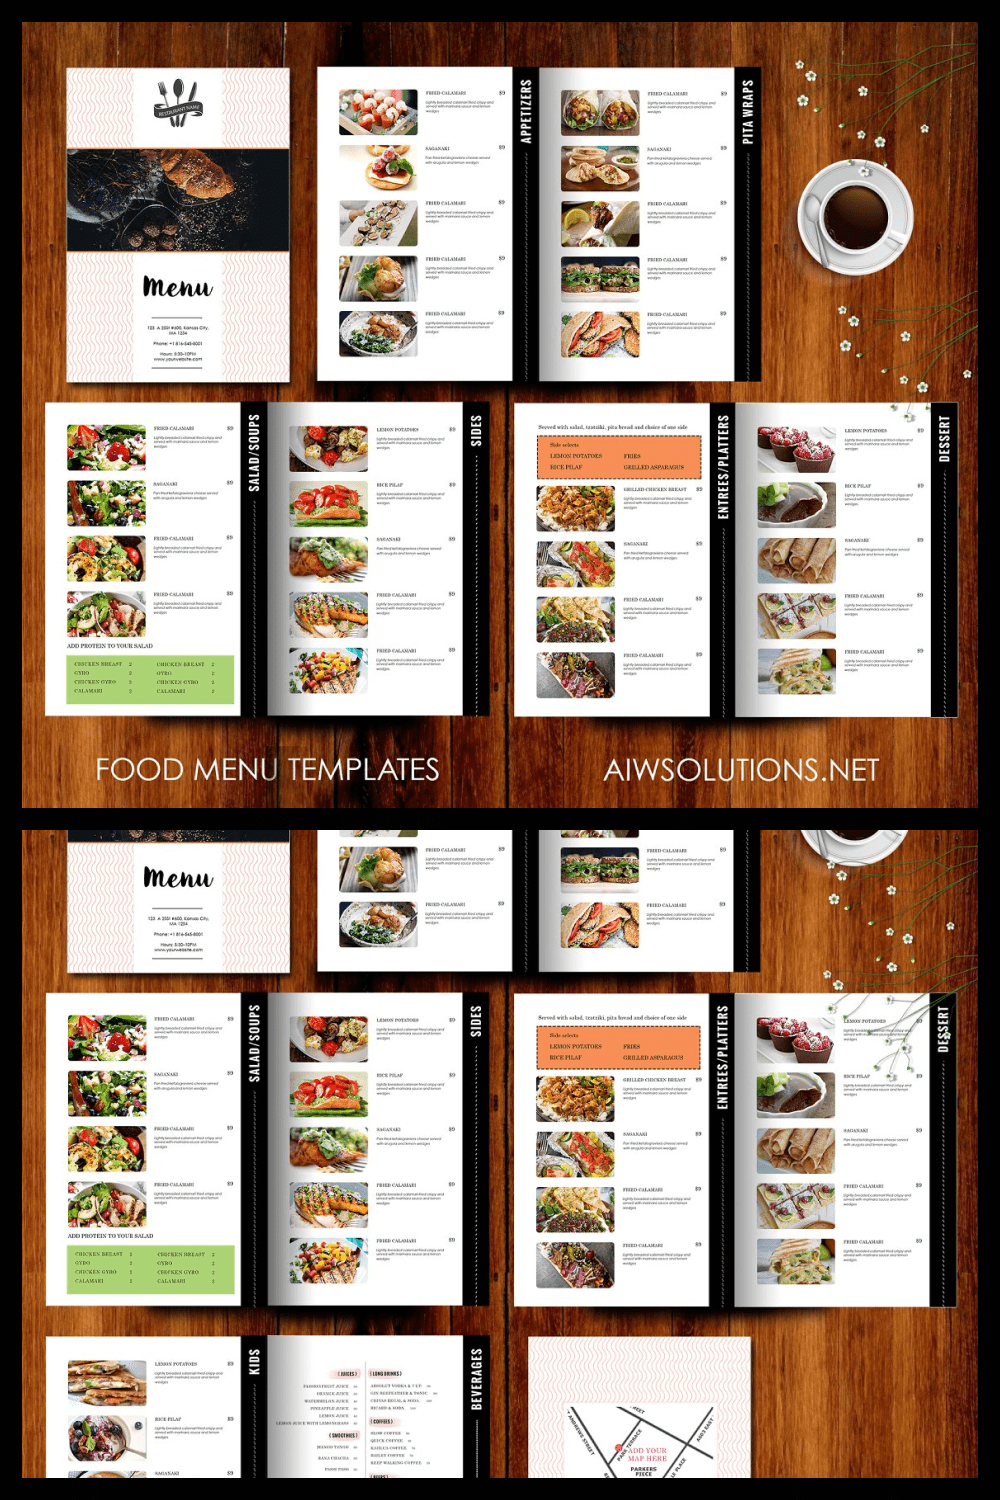 This is an editable template so you can use it again and again as your Food Menu change.